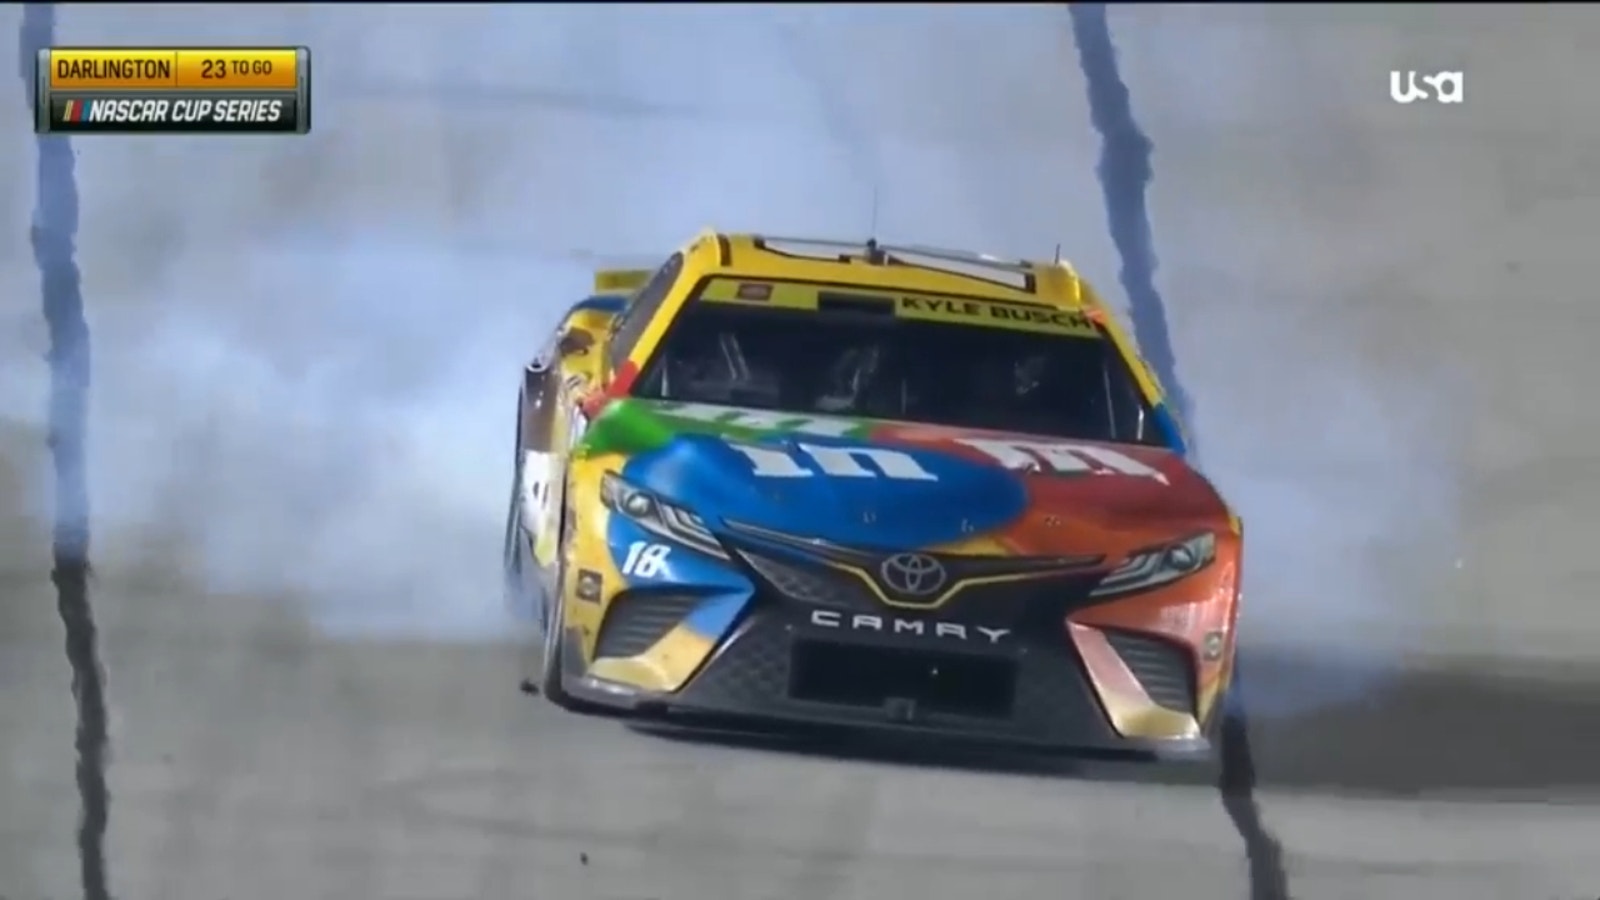 Kyle Busch's engine expires late while he leads the race